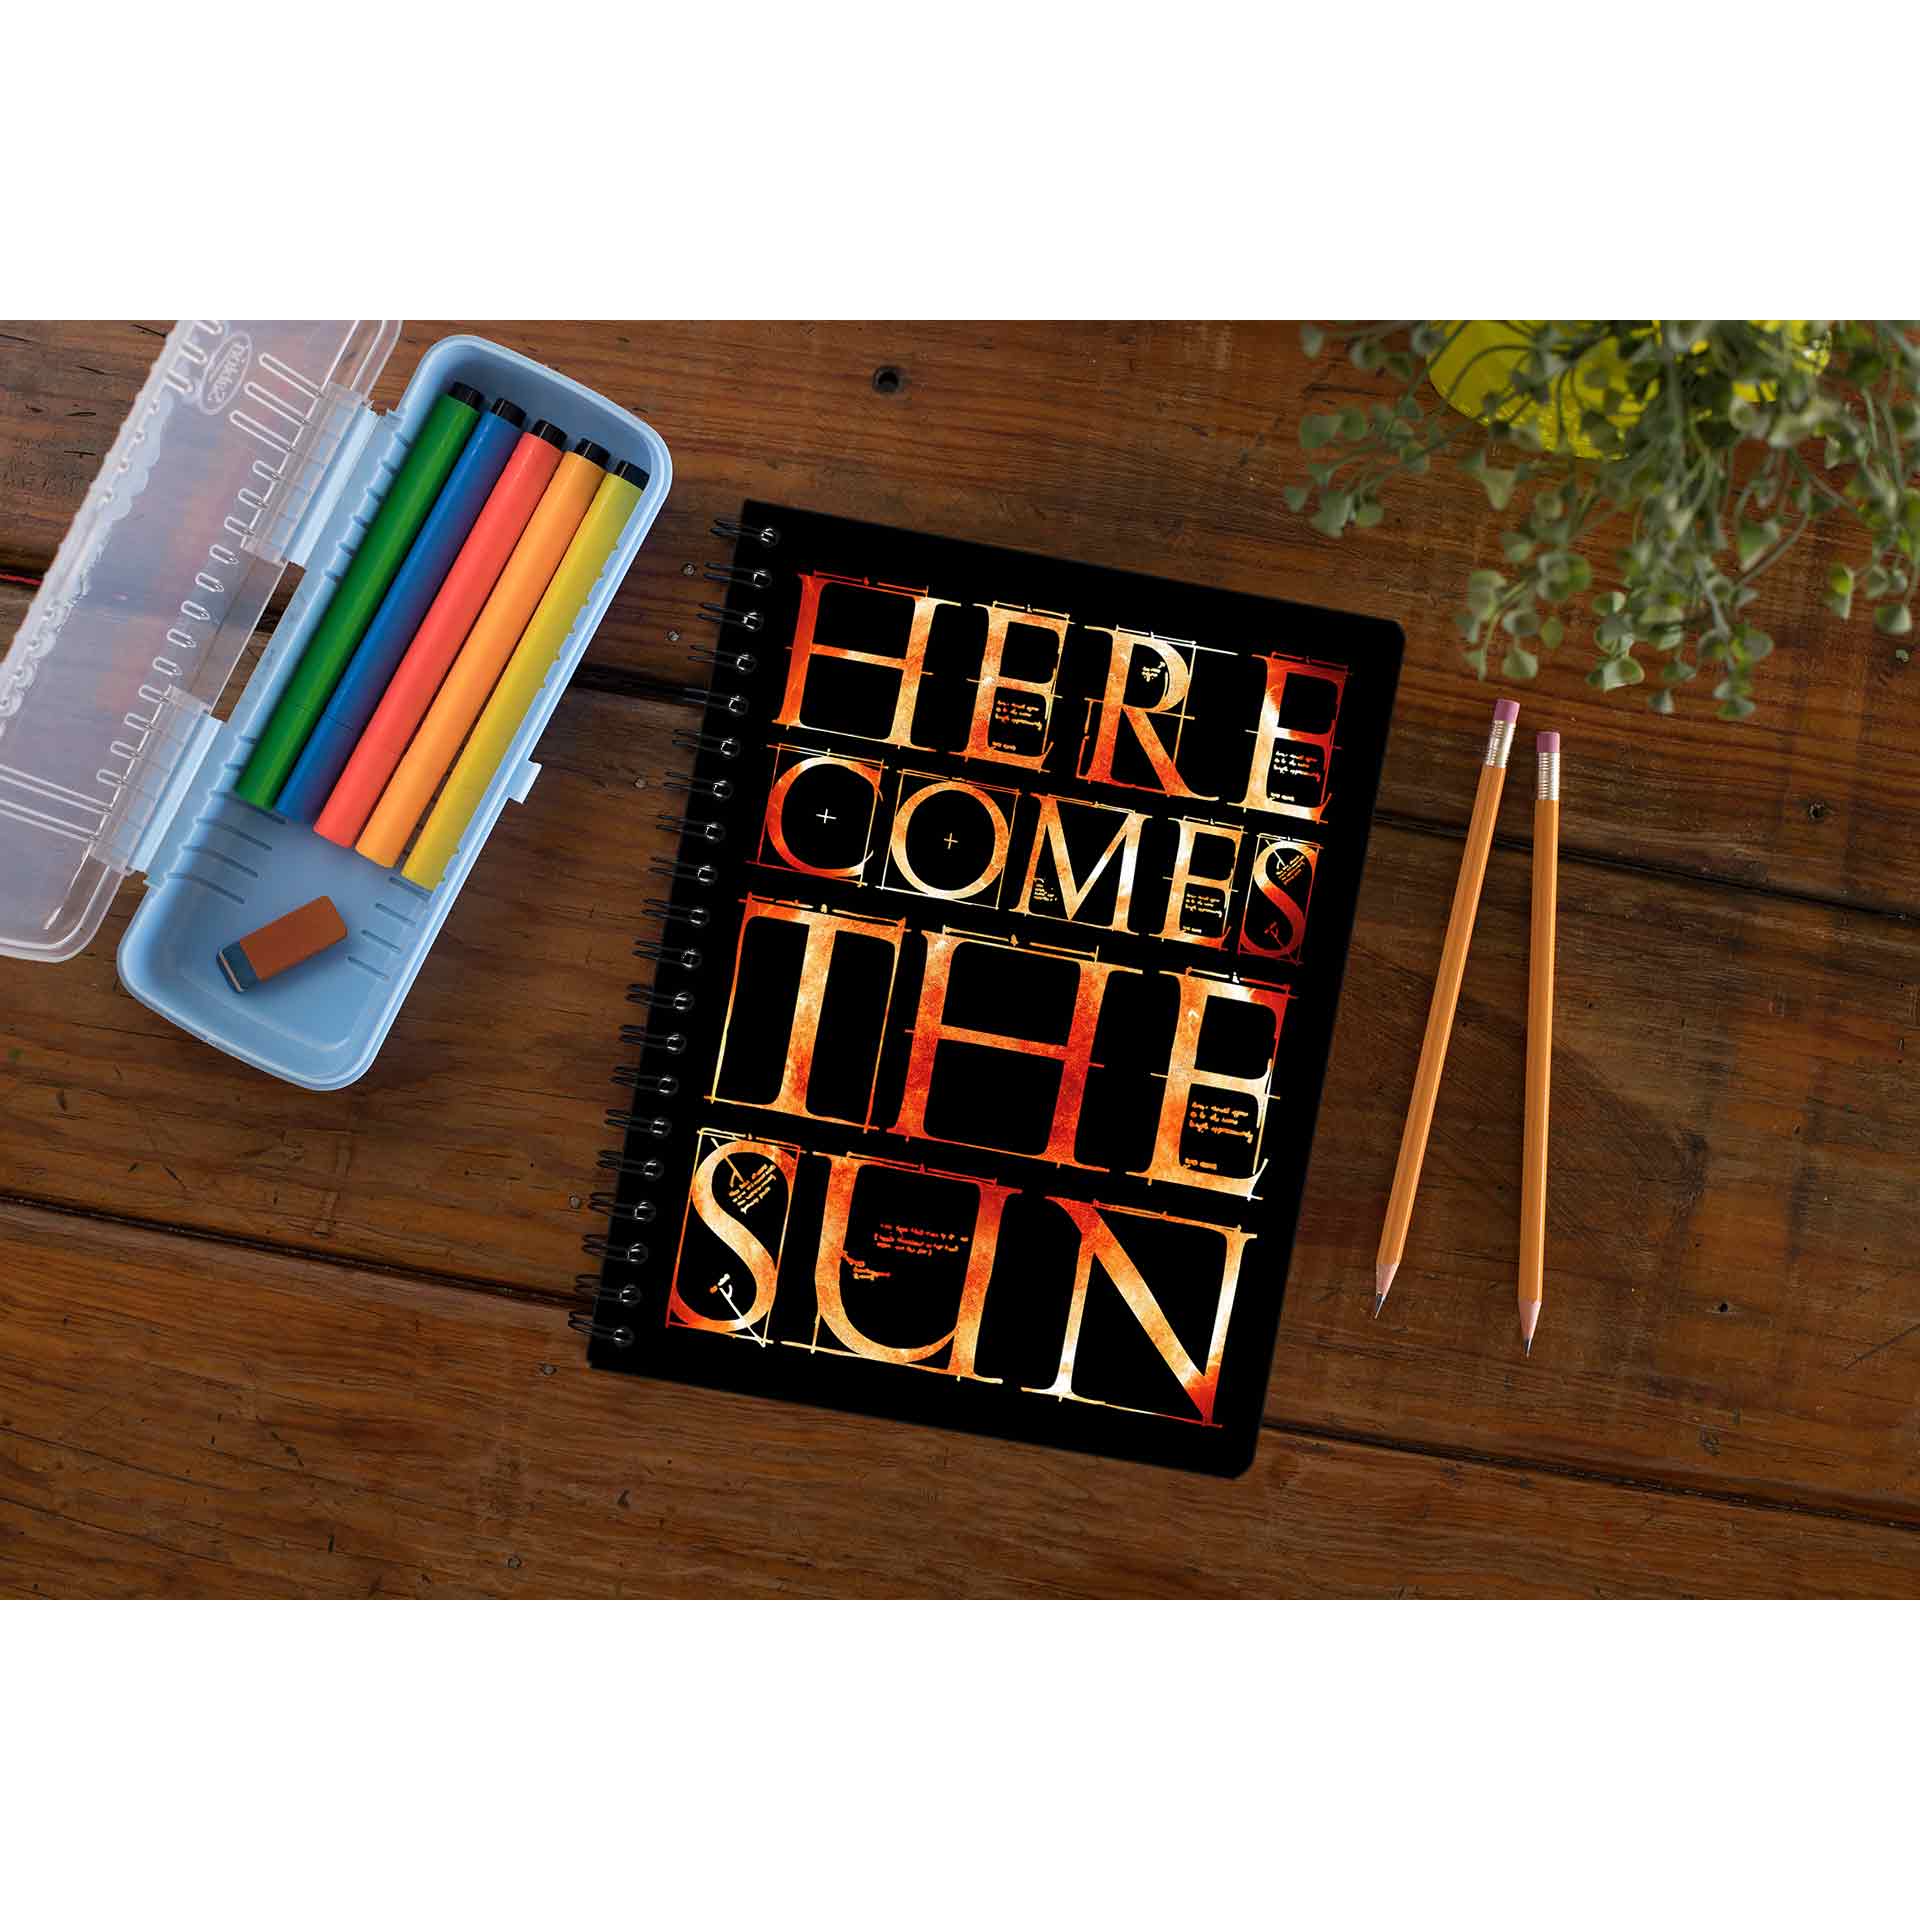 The Beatles Notebook - Here Comes The Sun Notebook The Banyan Tee TBT Notepad paper online diary personal girls cute office under 100